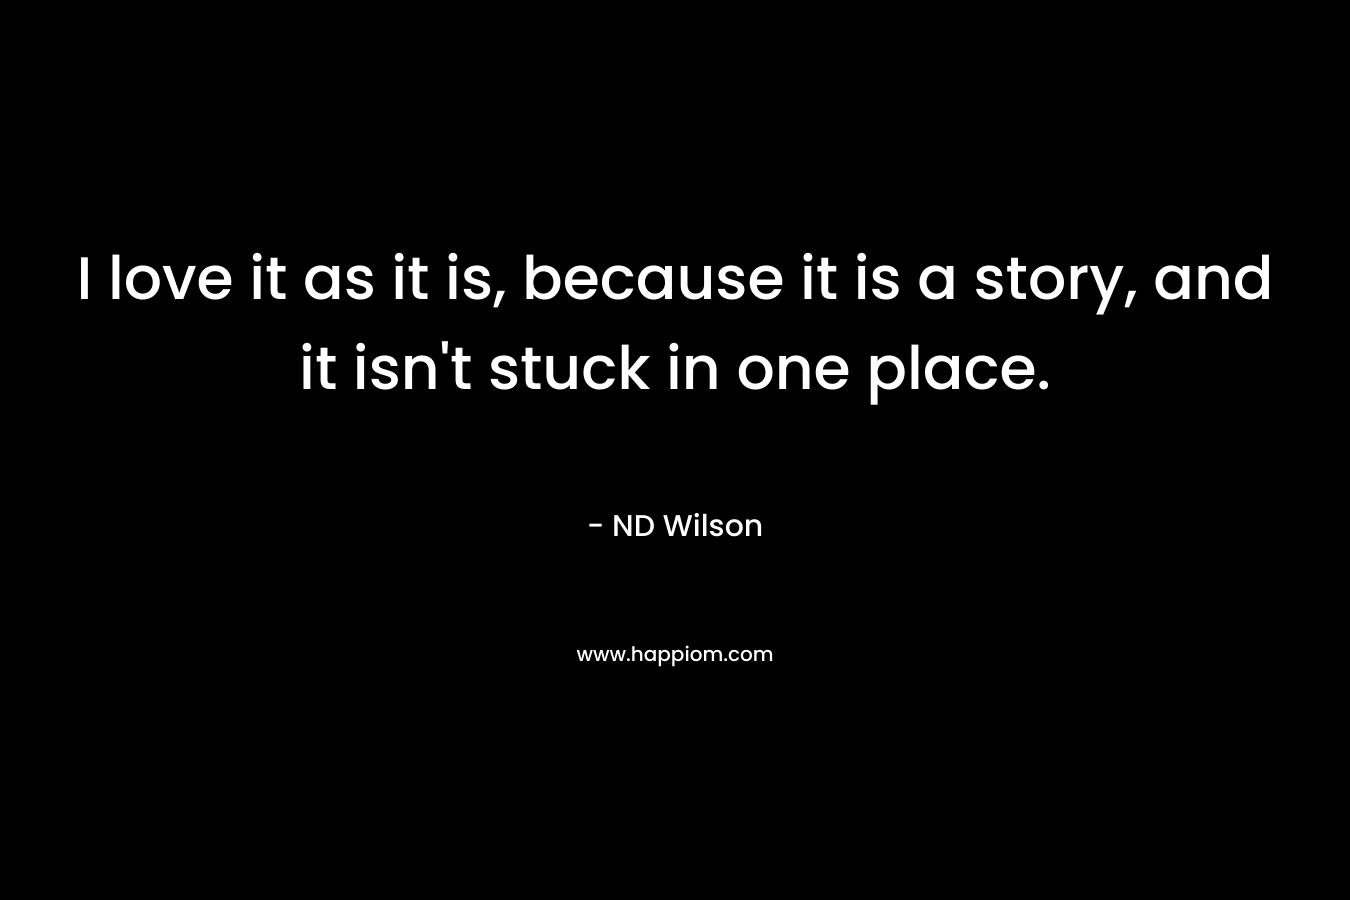 I love it as it is, because it is a story, and it isn't stuck in one place.